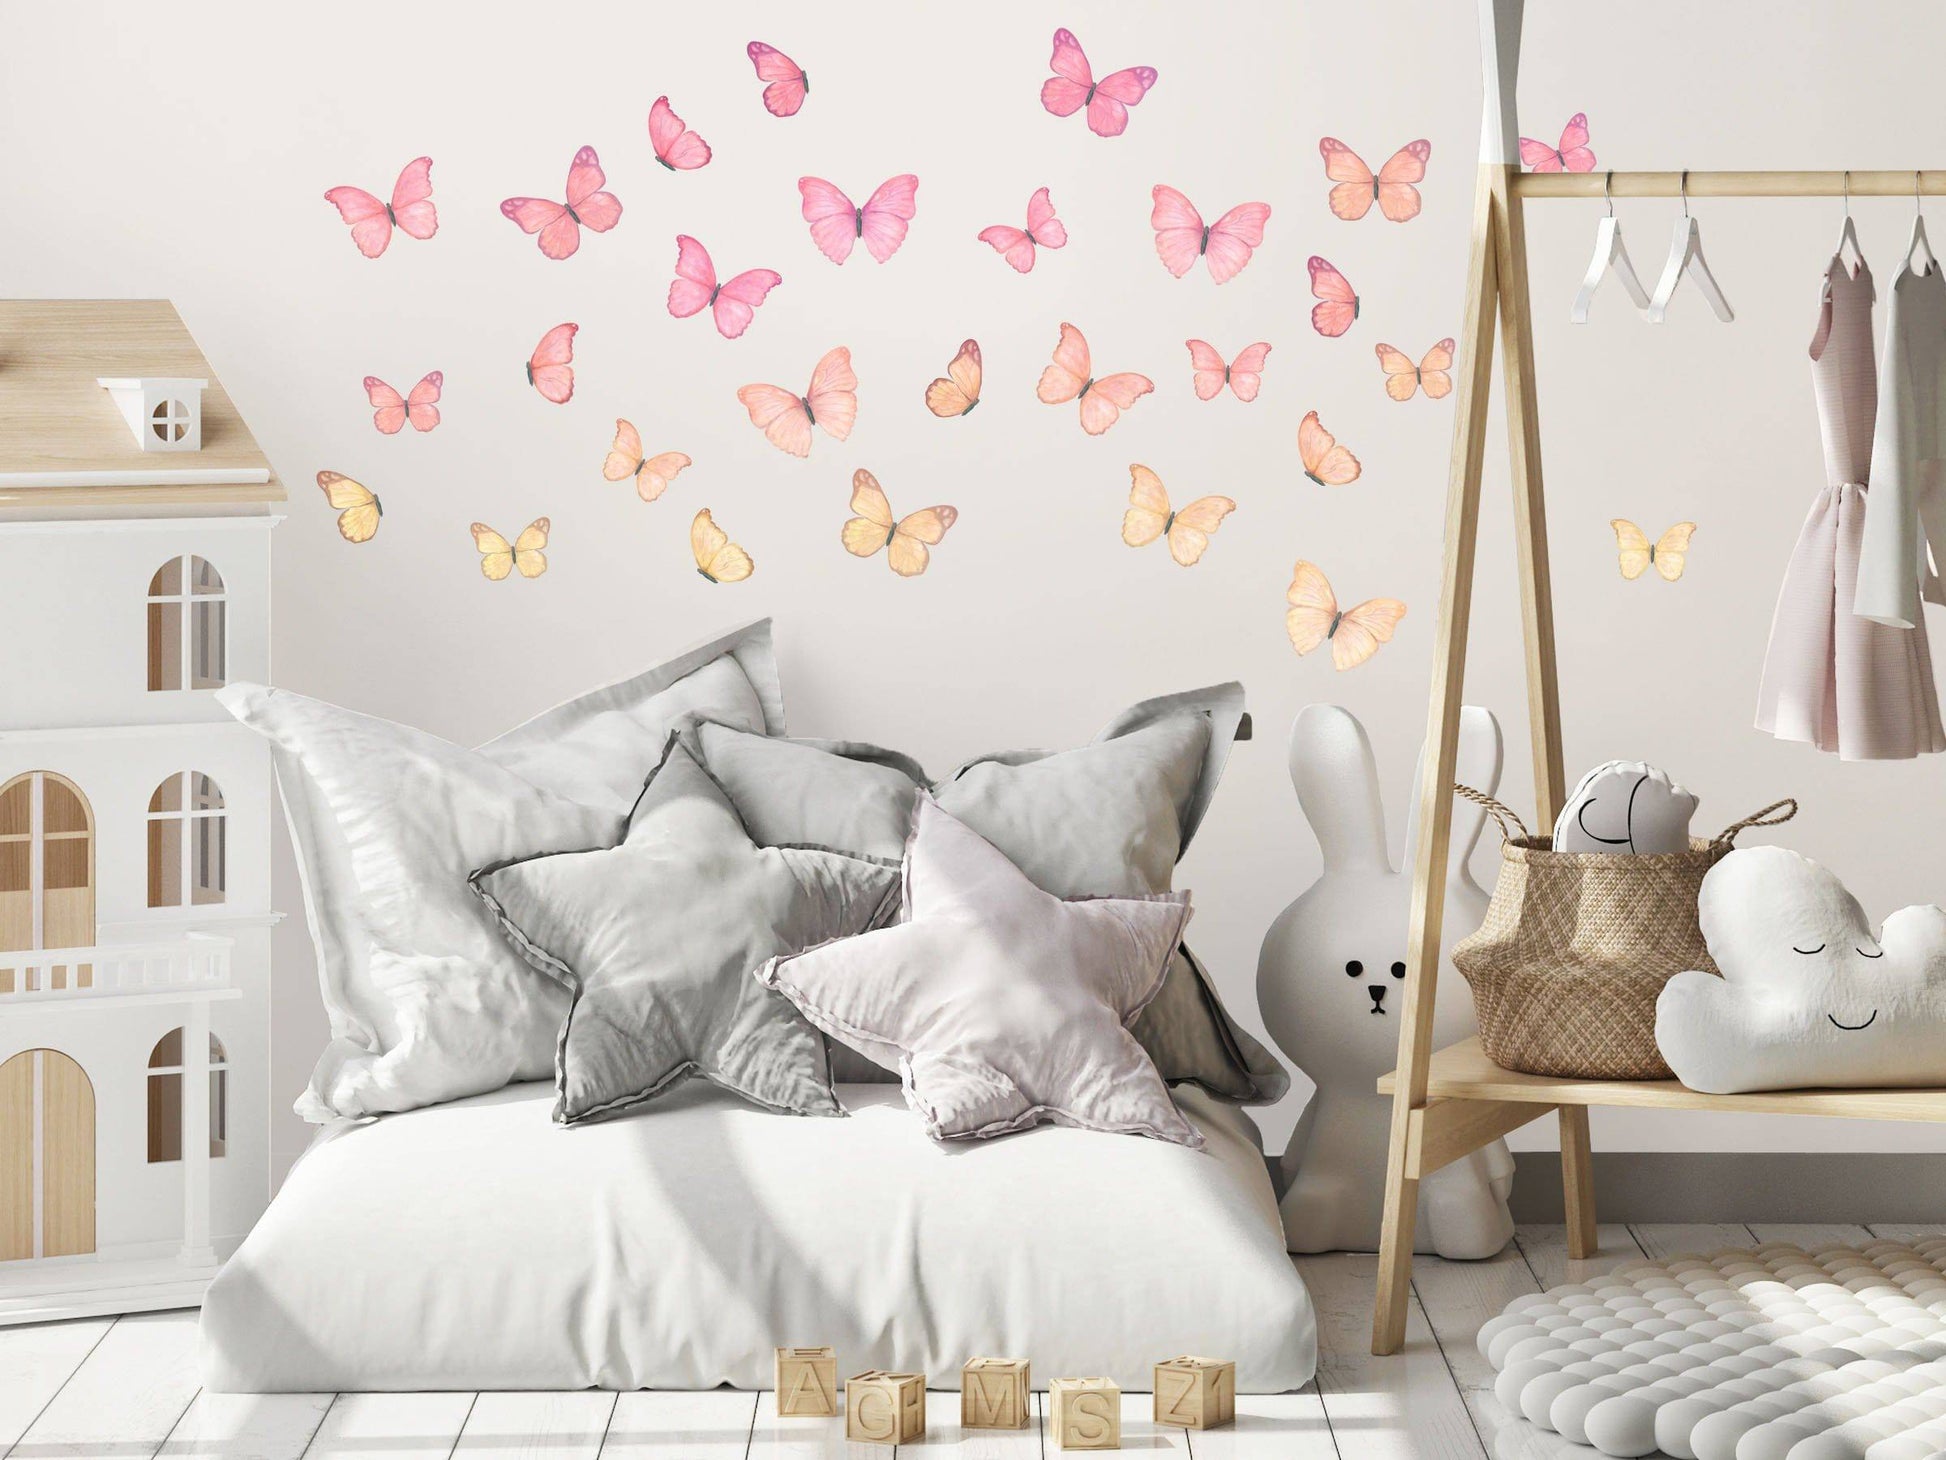 Butterfly Wall Decals (Sunset) - Wall Decals - Fable and Fawn 